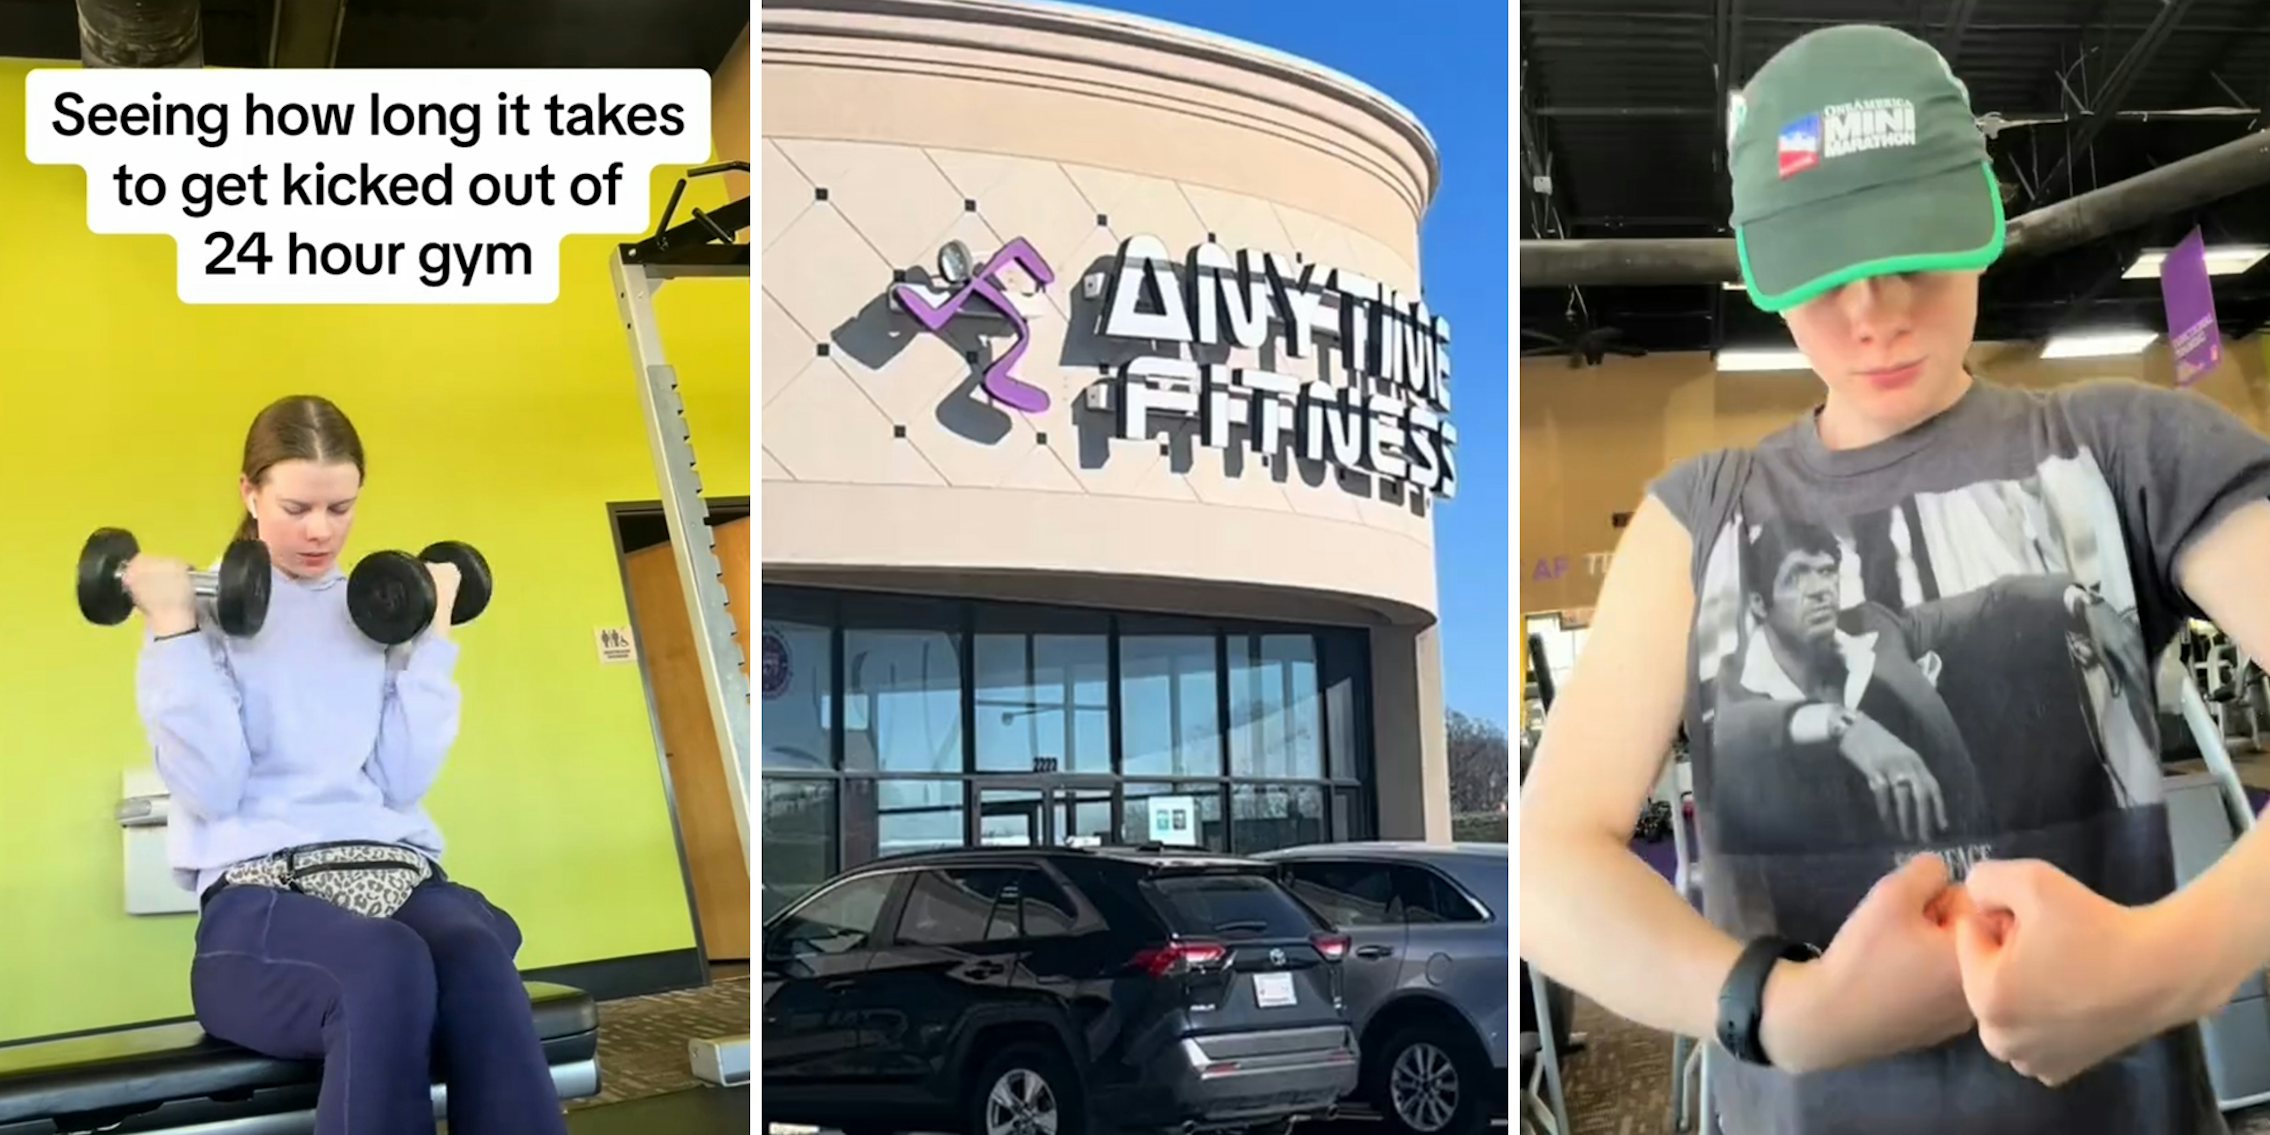 Buffet marathoner spends 26 hours at Anytime Fitness for free without getting kicked out